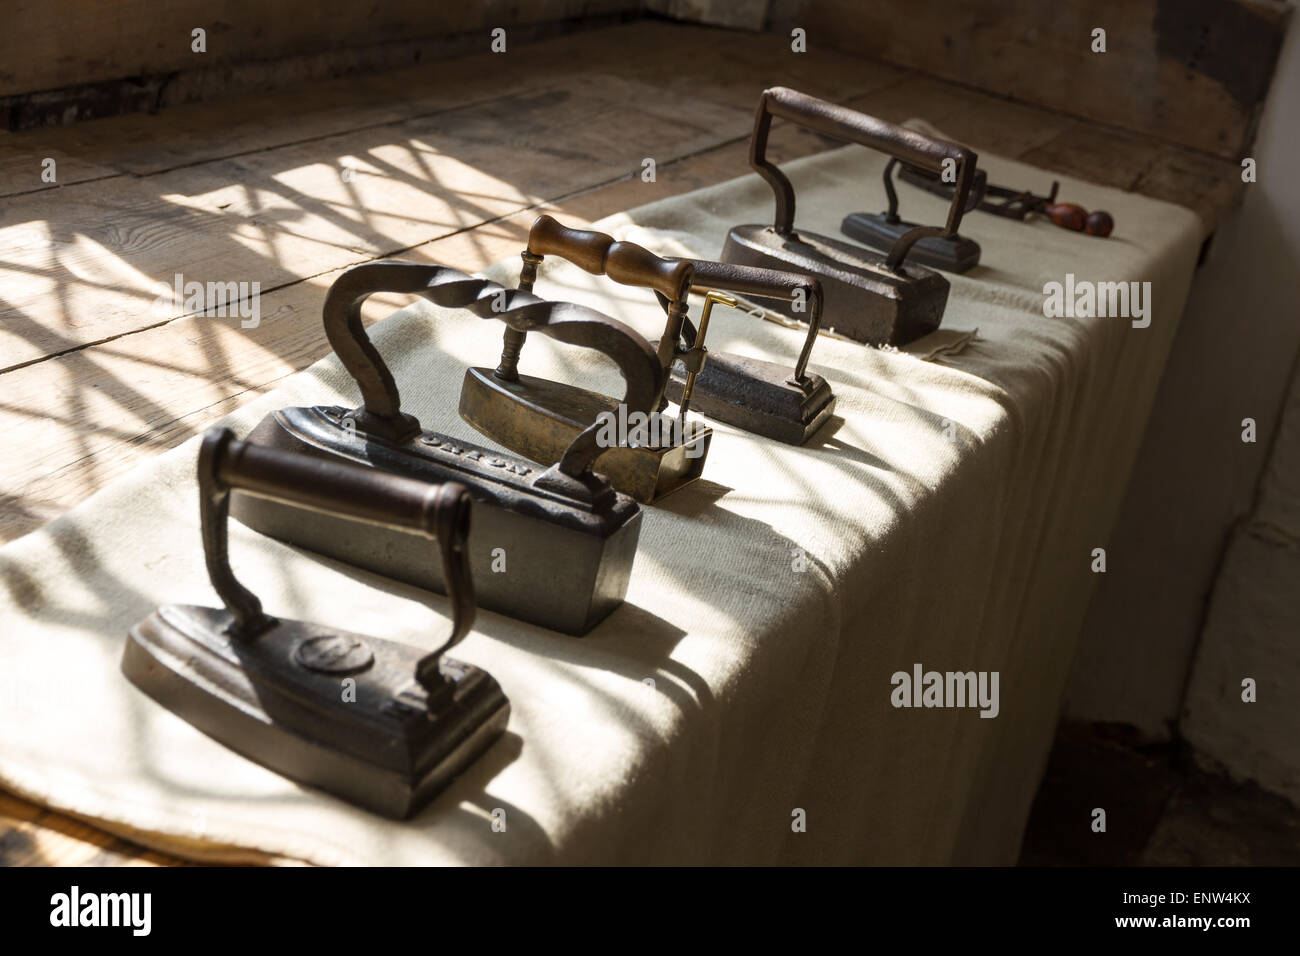 Collection of old metal clothes irons Stock Photo